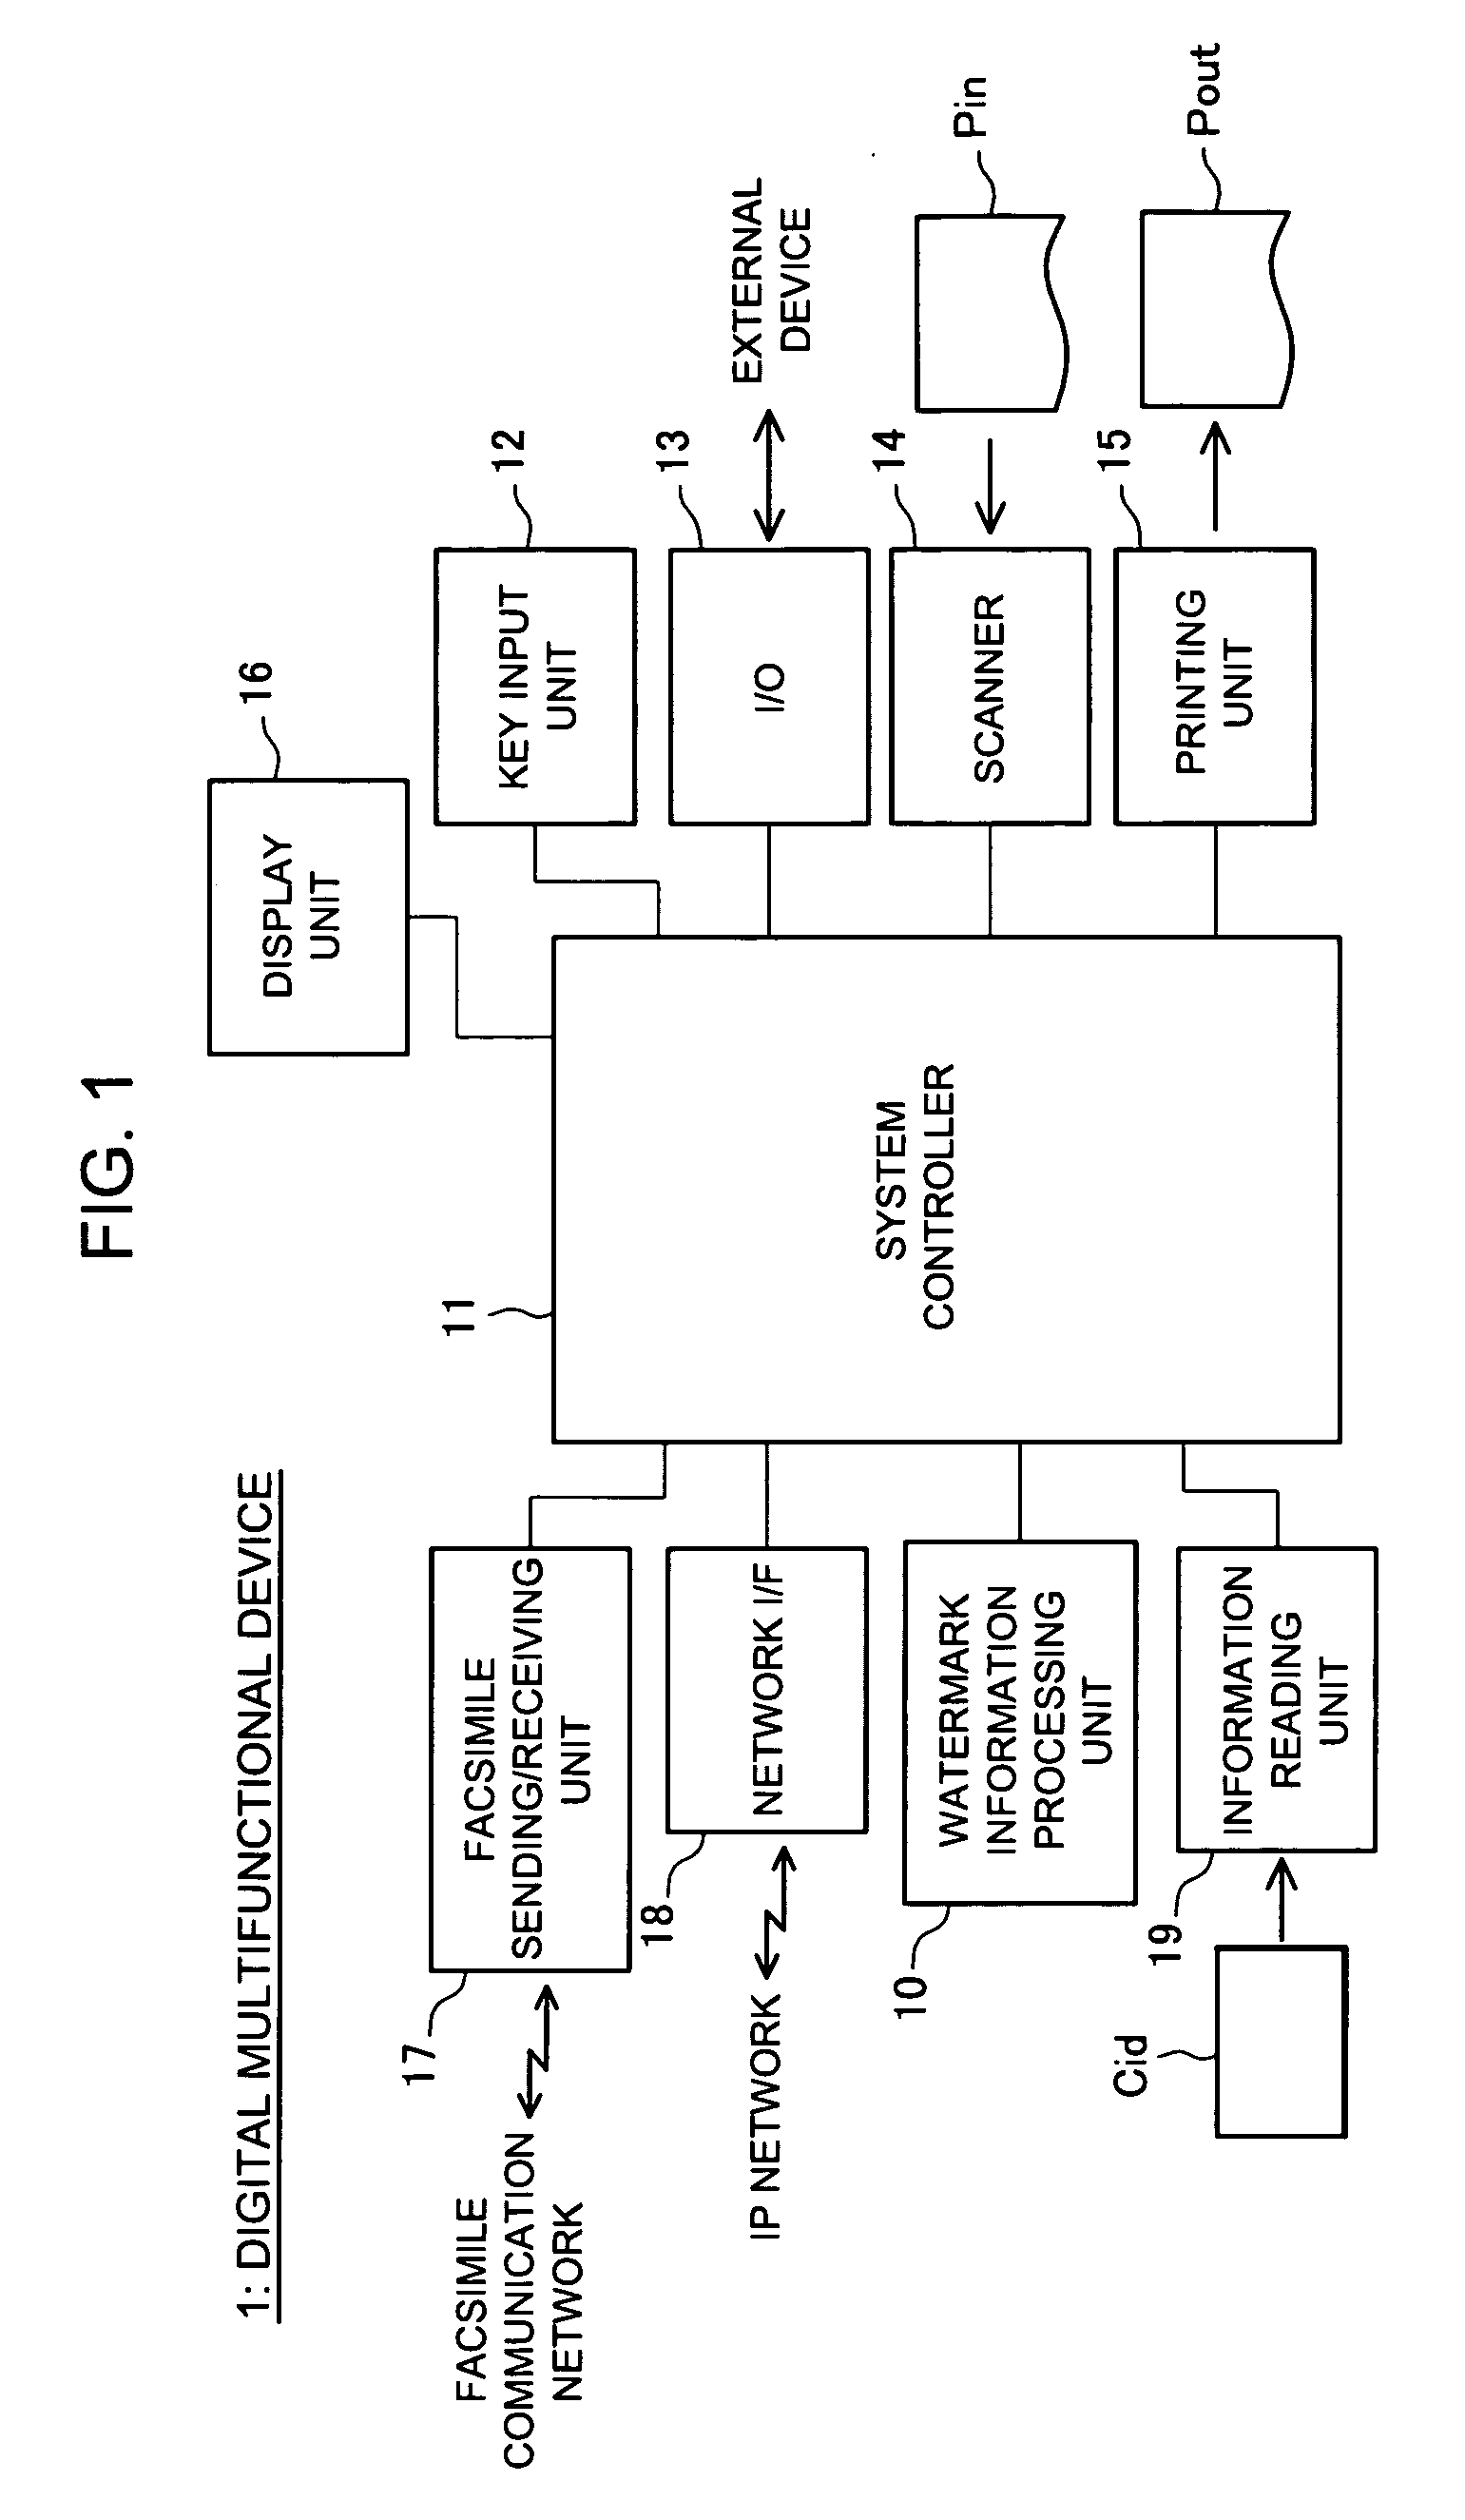 Additional Information Processing Apparatus, Additional Information Processing System, and Additional Information Processing Method